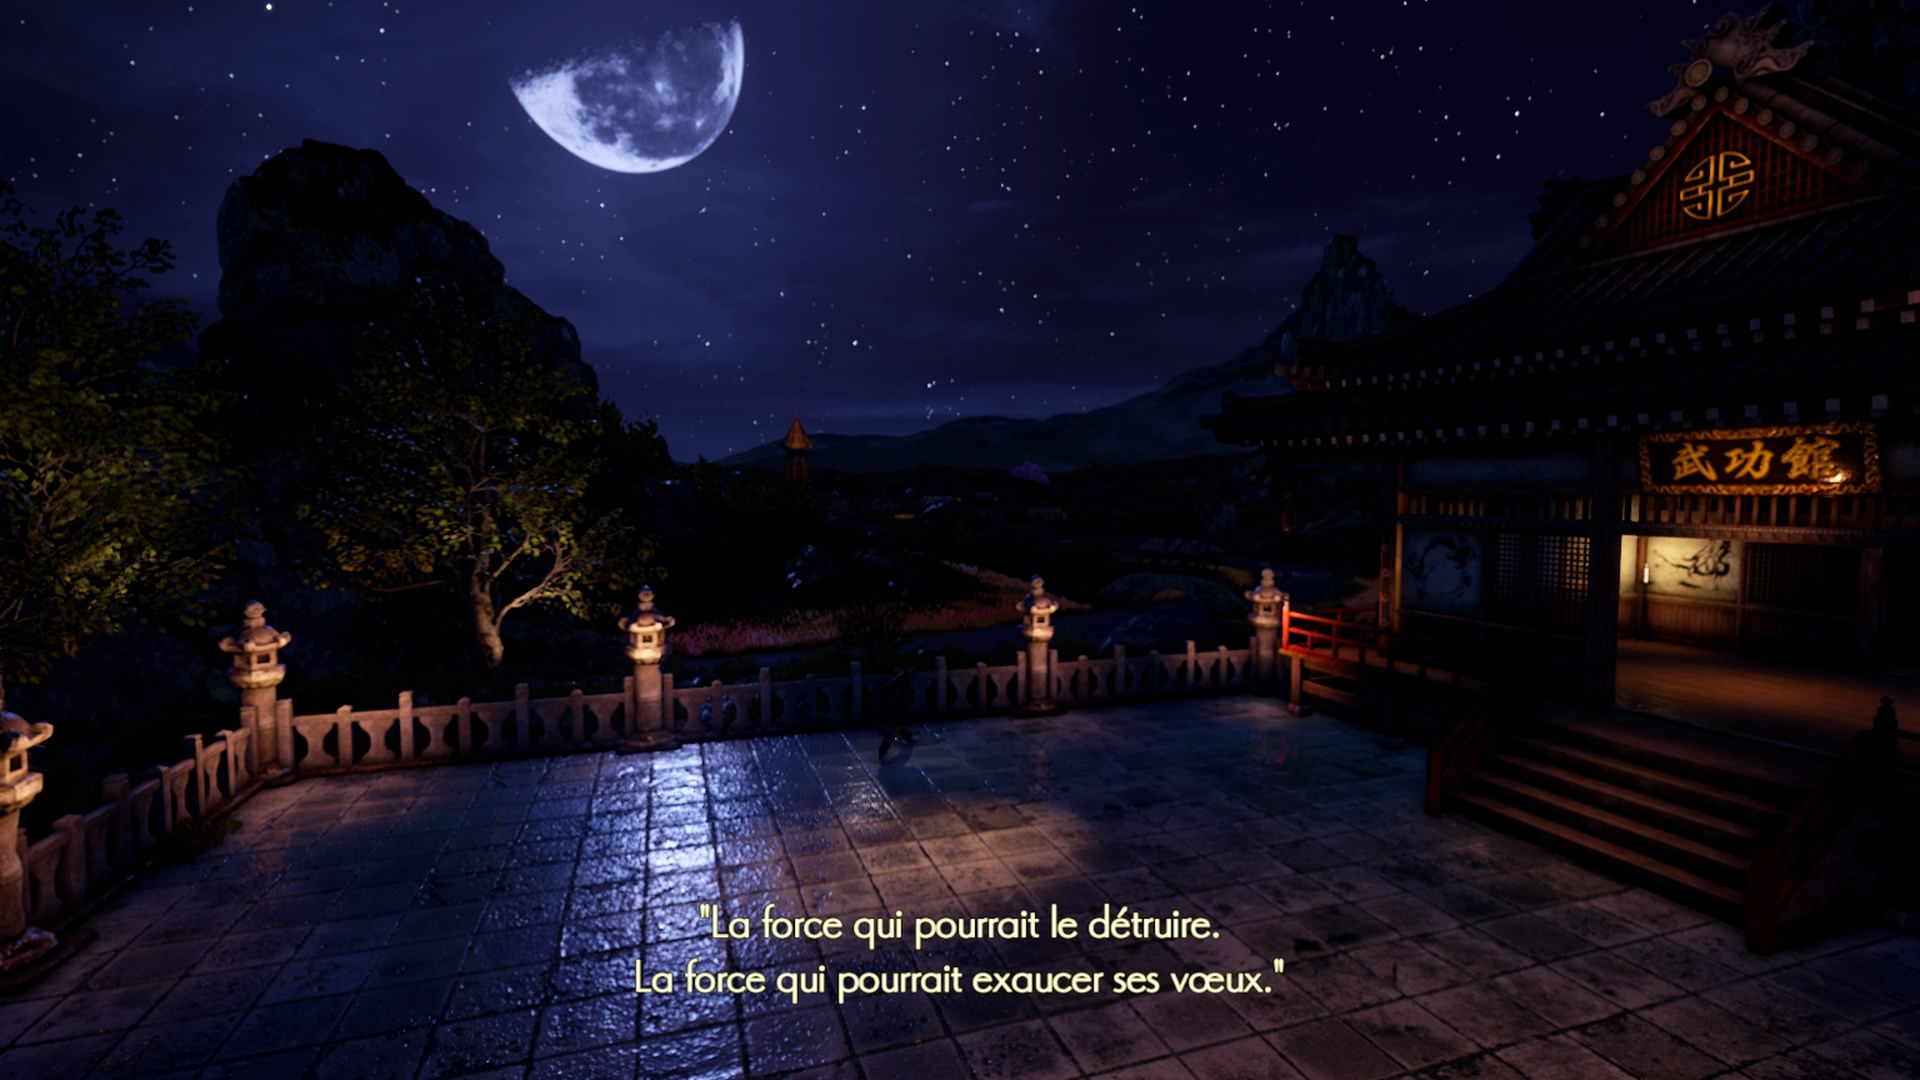 Shenmue III Test